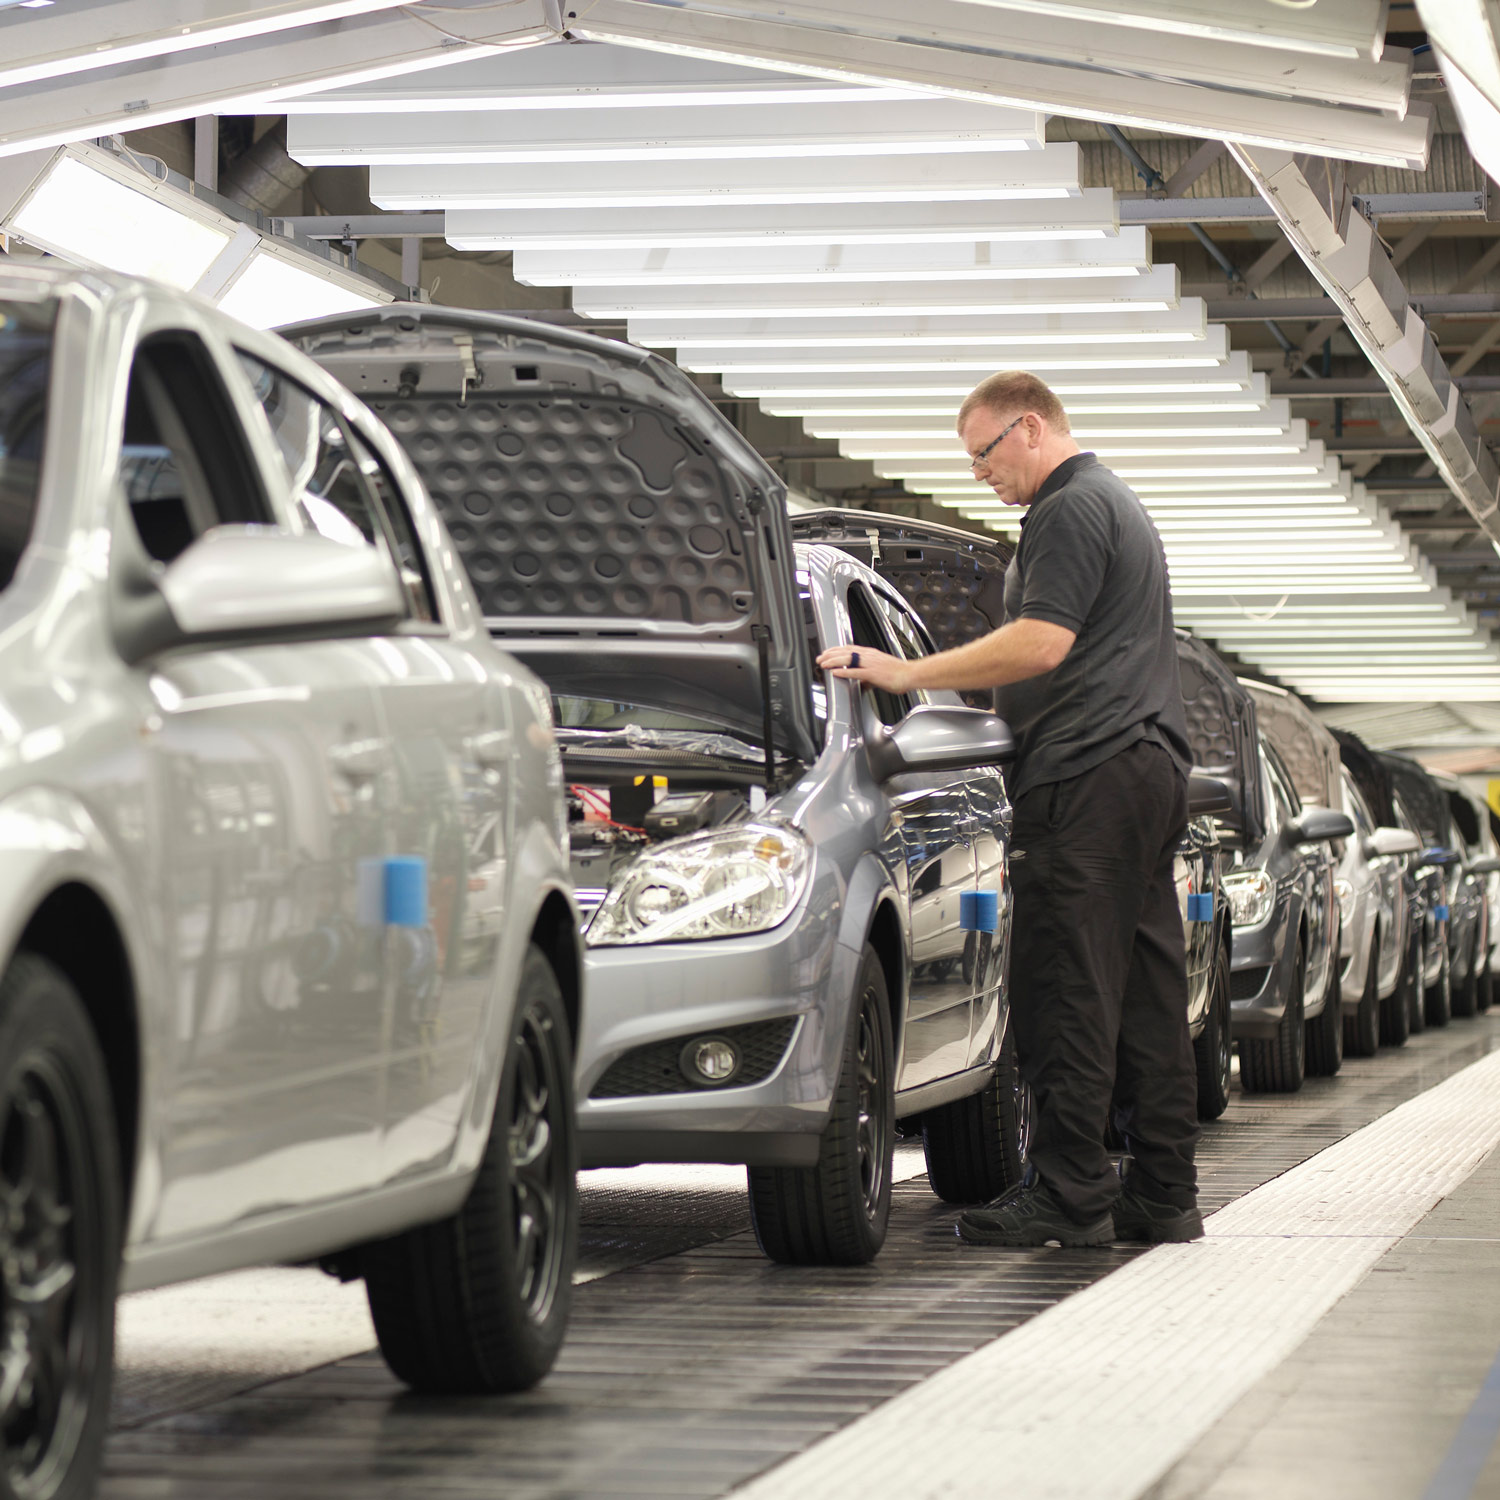 A man inspecting a line of silver cars at the end of an assembly line